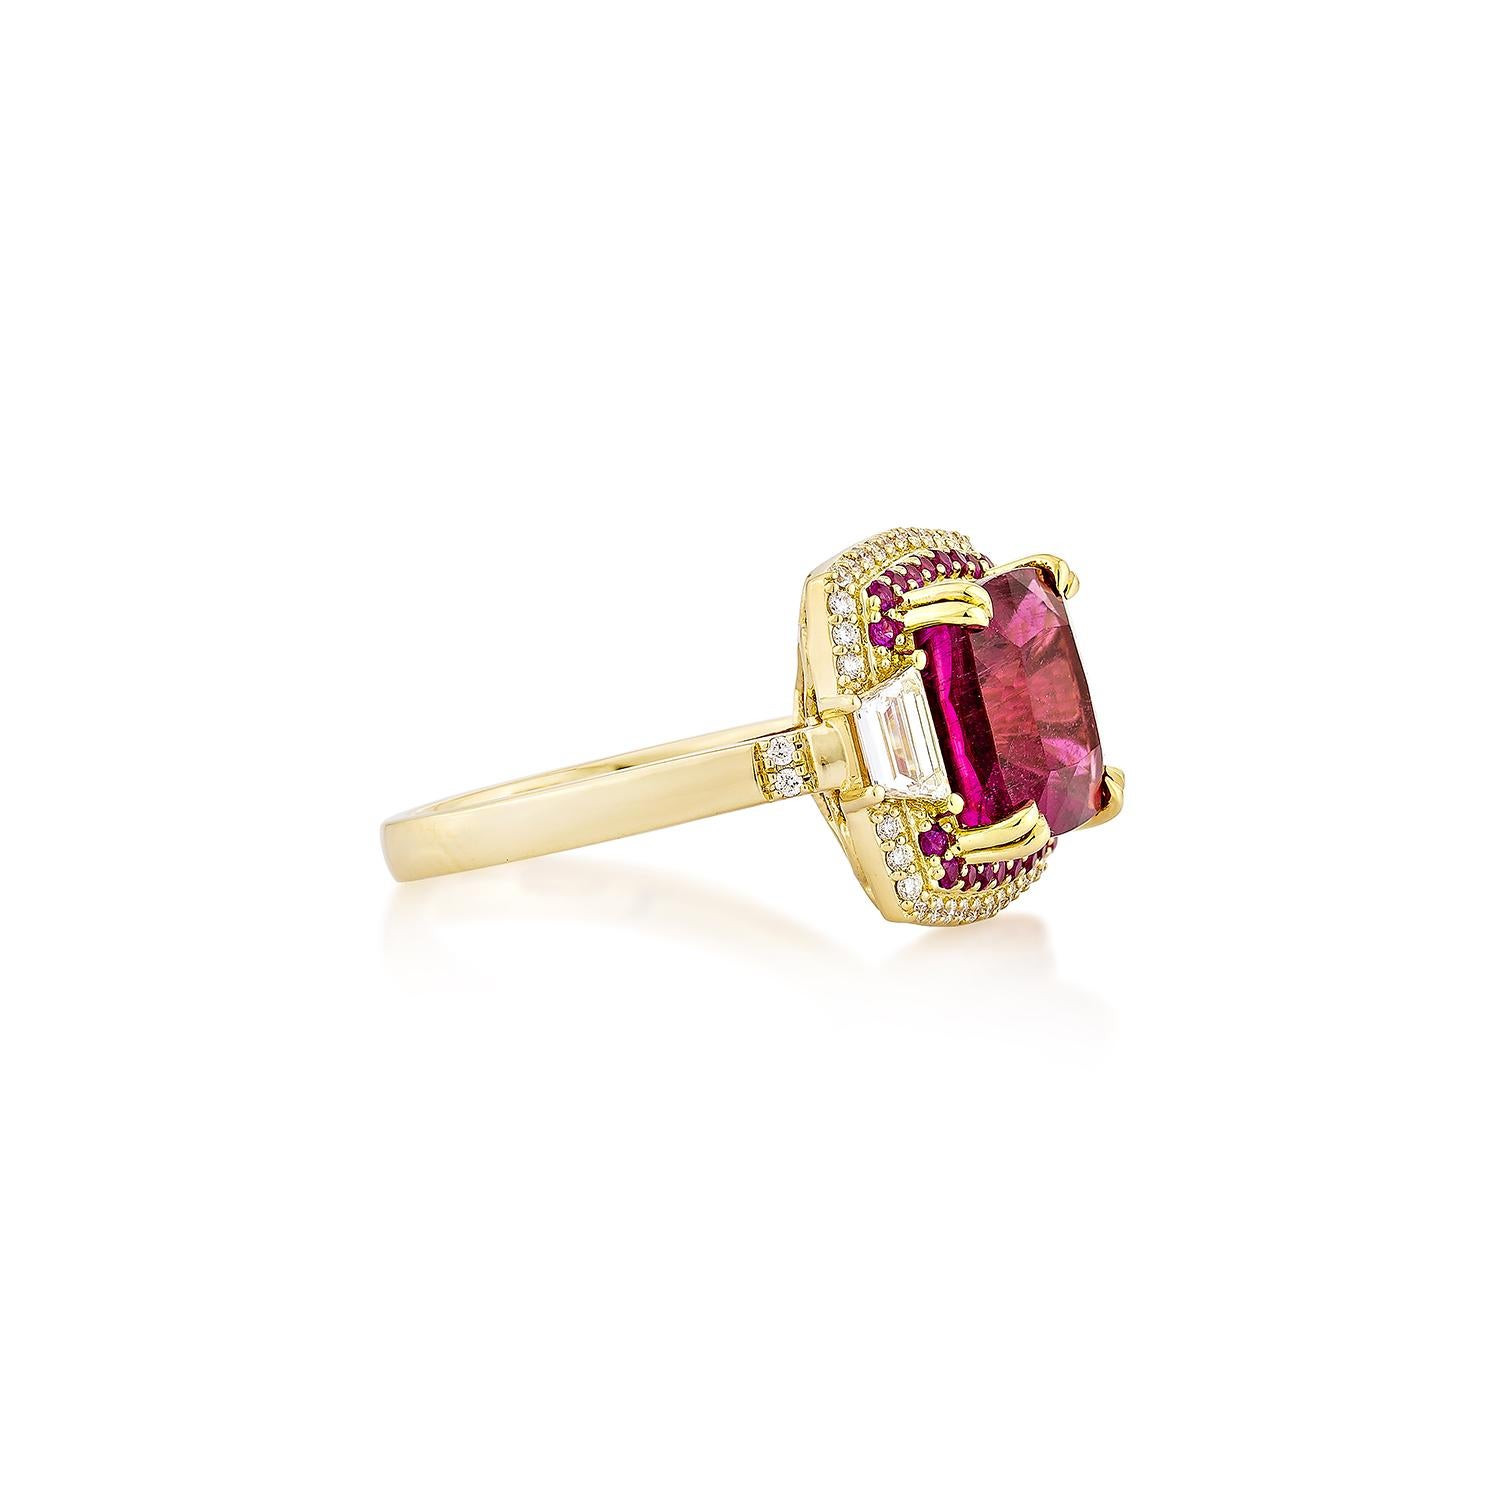 Sunita Nahata showcases an exquisite diamond studded Rubellite ring that exudes grace and elegance. This exquisite 18Karat yellow gold ring is ideal for any special occasion because it combines traditional elegance with modern flair.

Rubellite